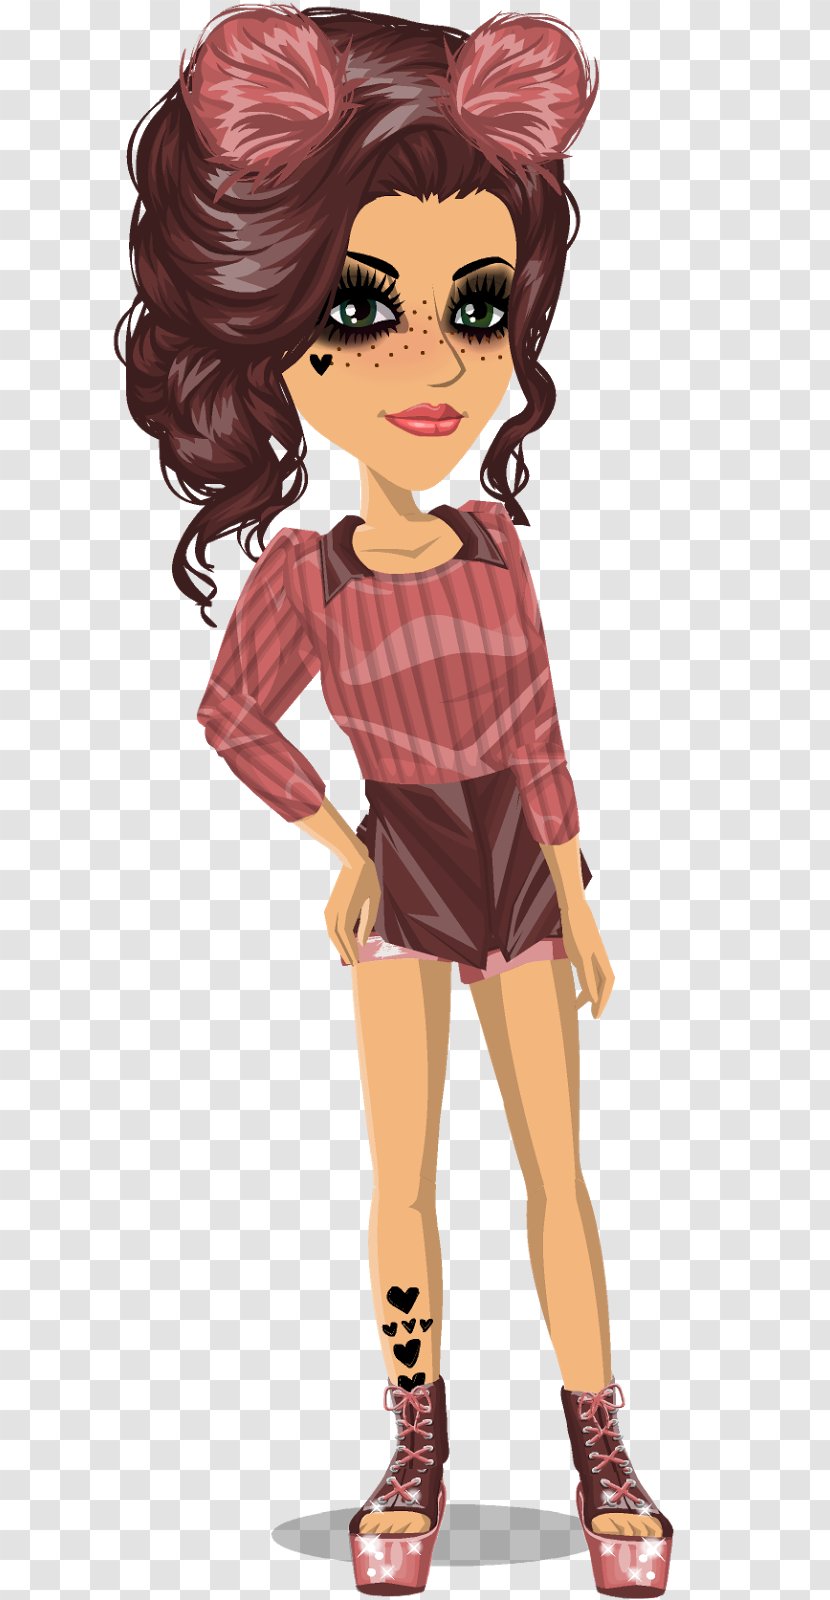 MovieStarPlanet Character Design Animation - Watercolor - Autumn Clothes Transparent PNG